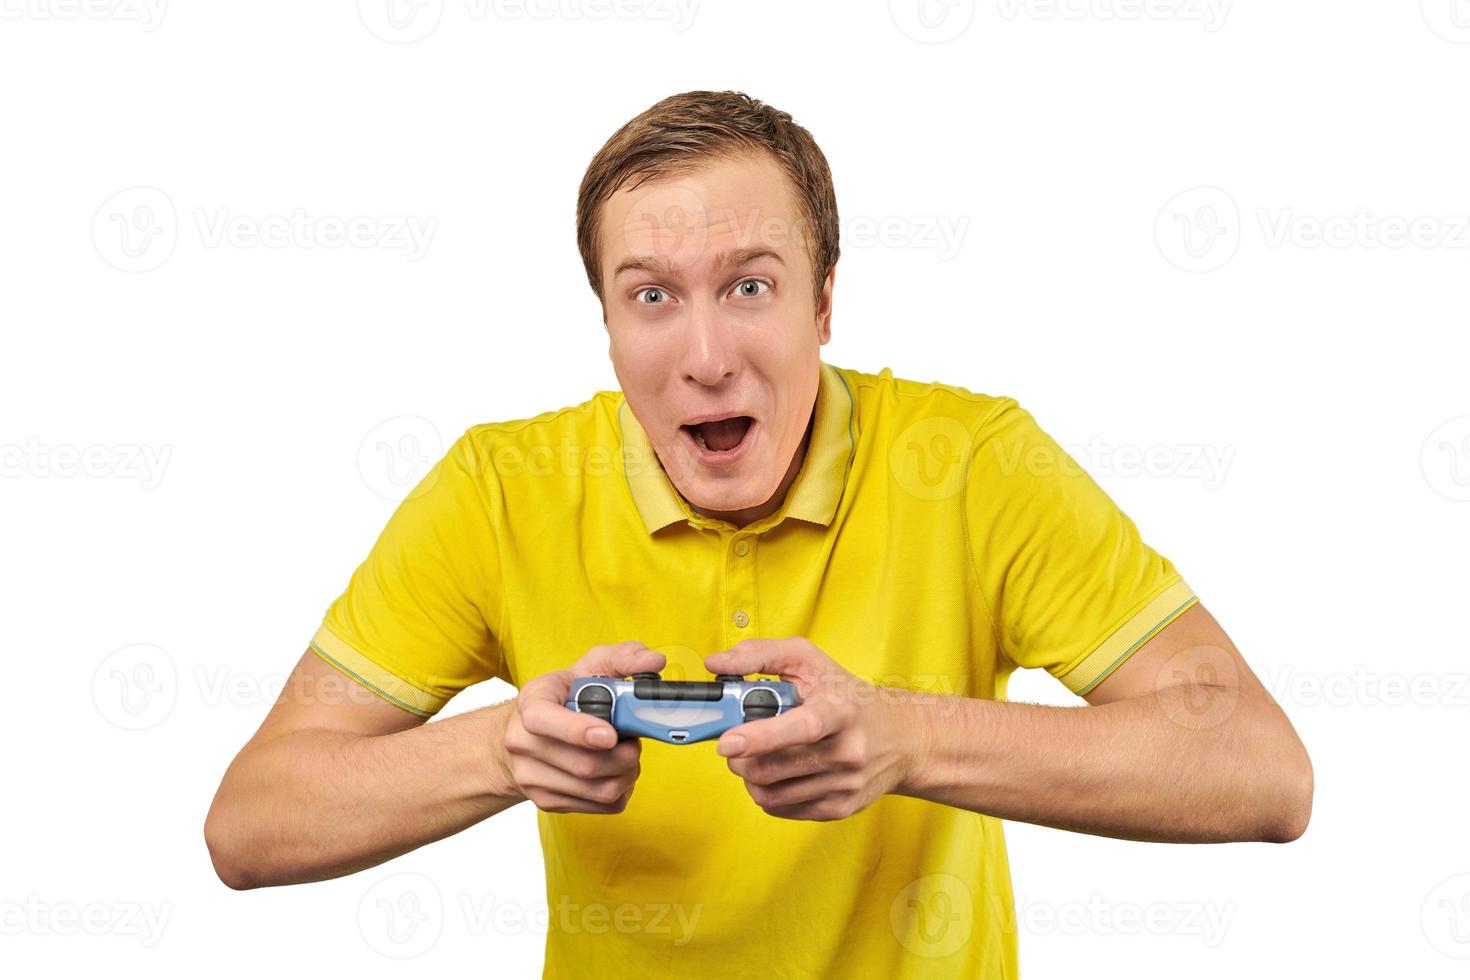 Funny gamer with gamepad, excited video game player concept isolated on white background photo